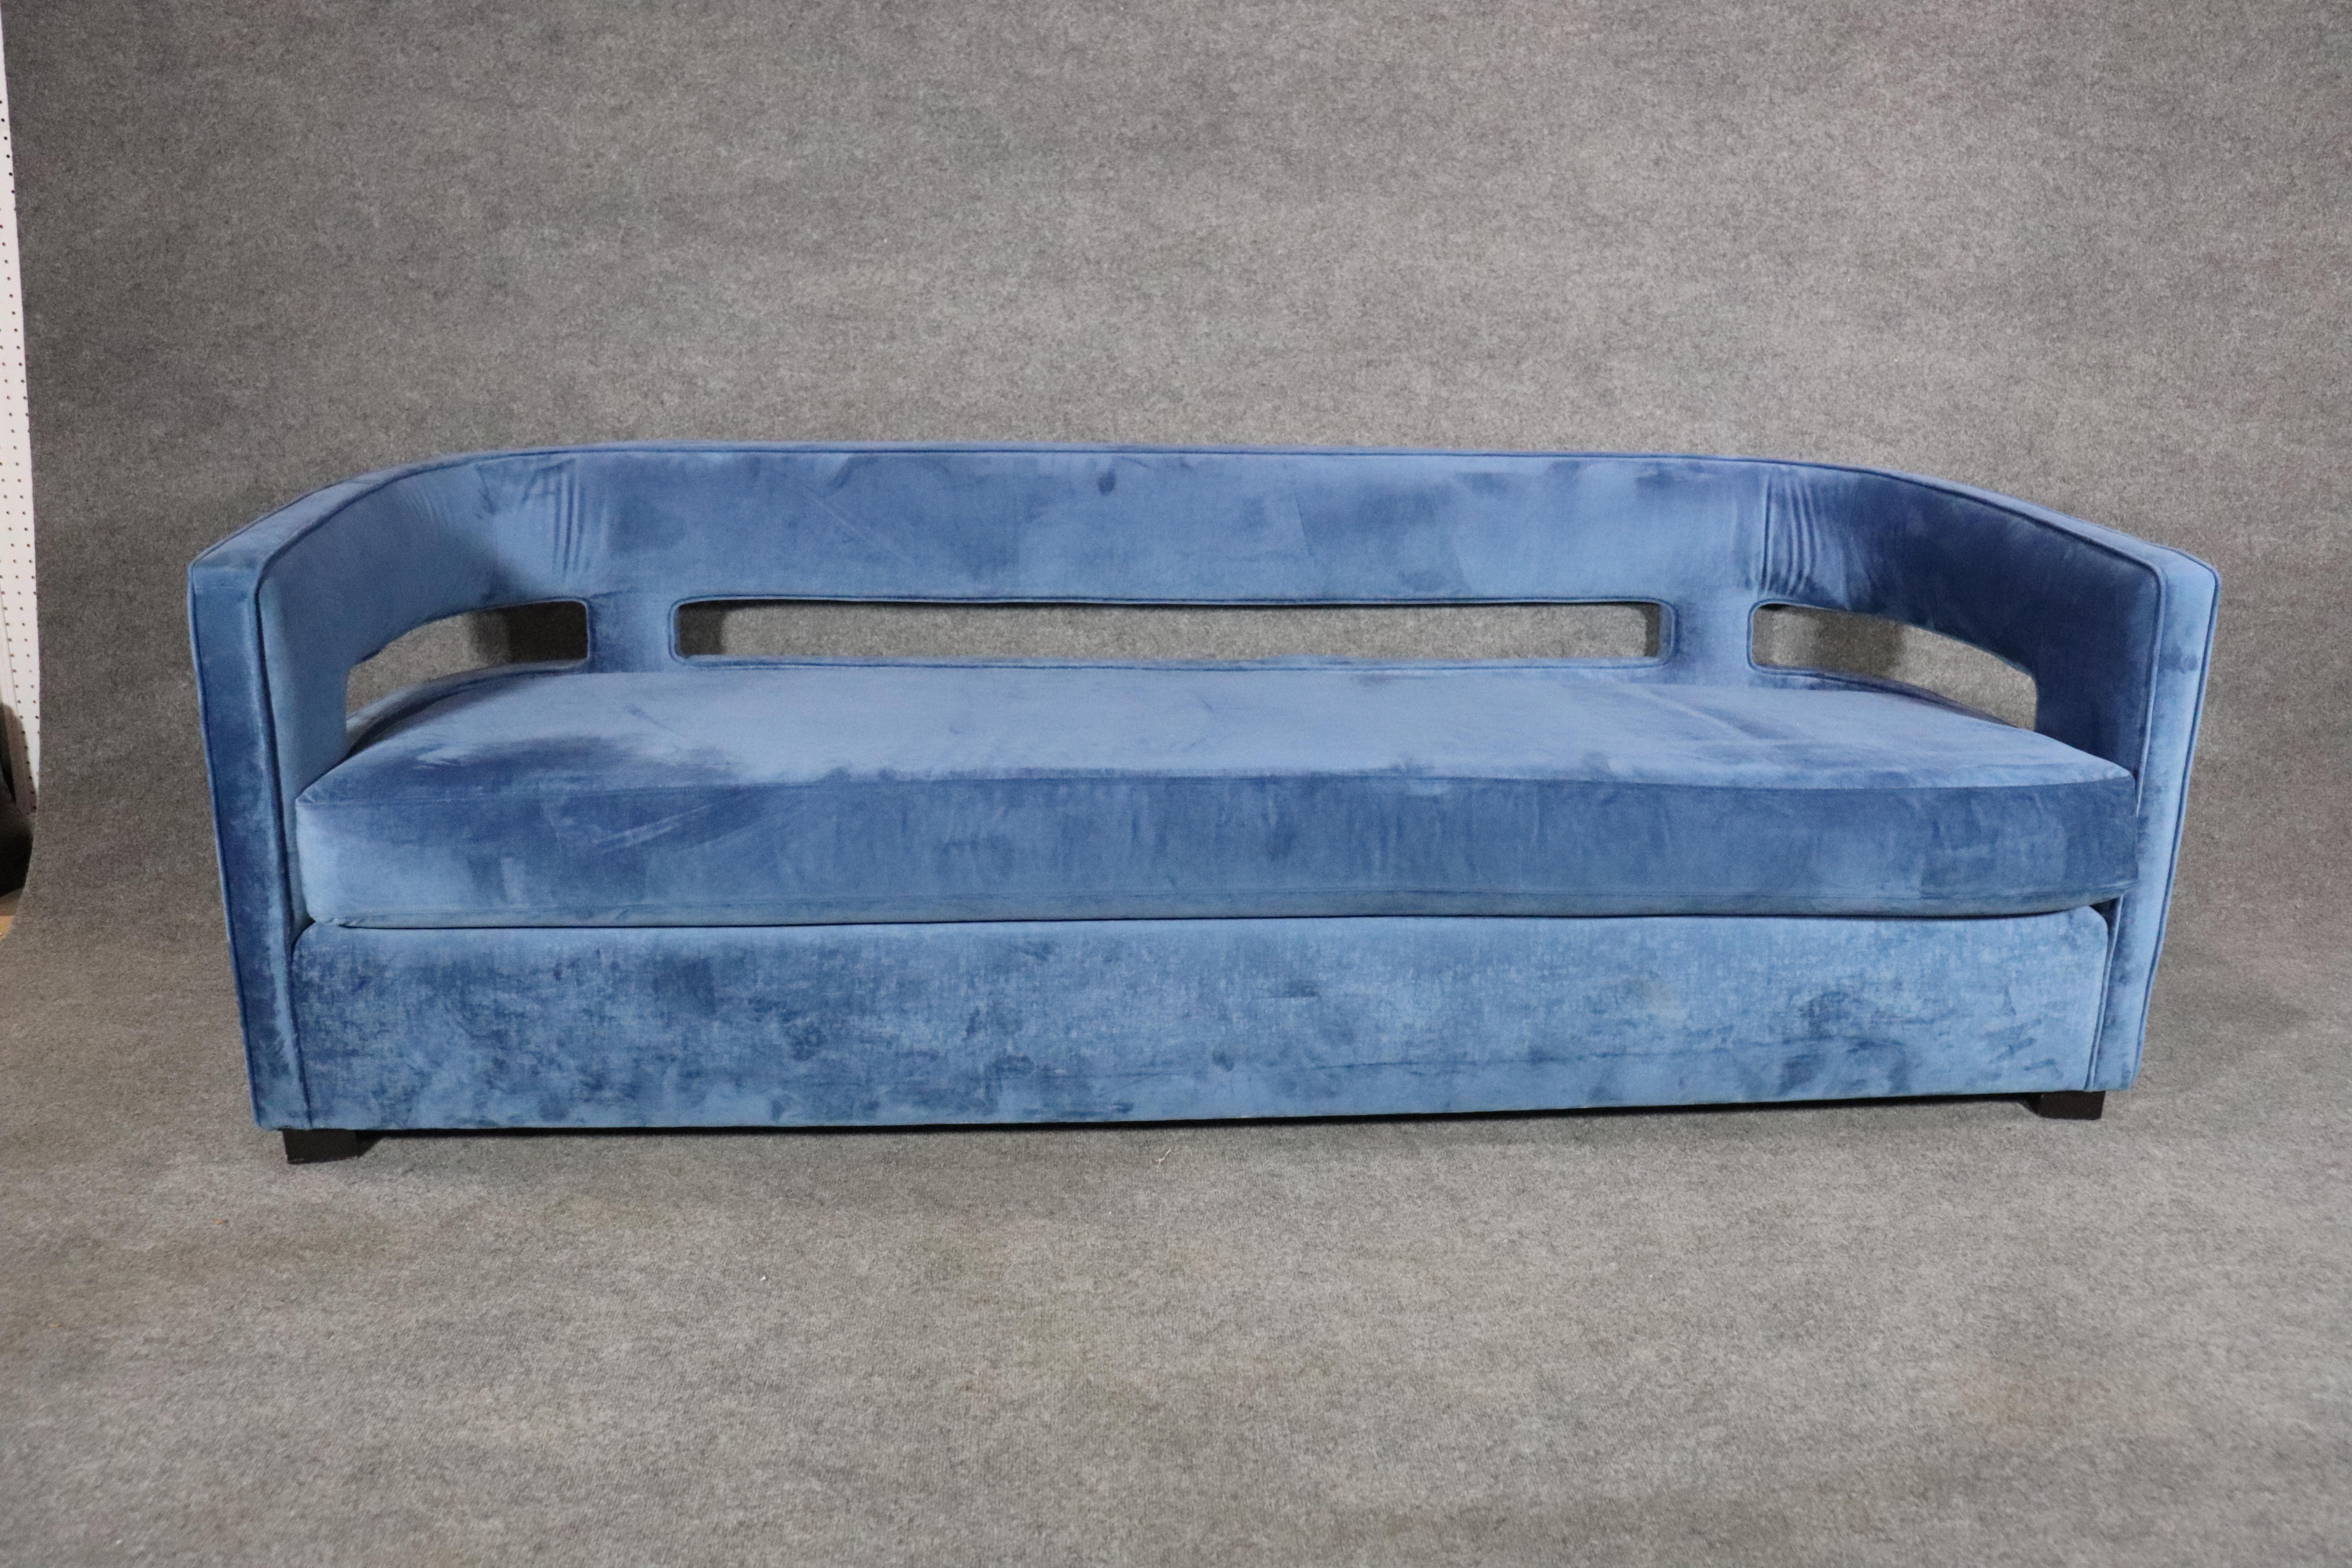 Modern satin sofa with an open curved back. Beautiful blue velvet fabric with mid-century modern style.
Please confirm location.